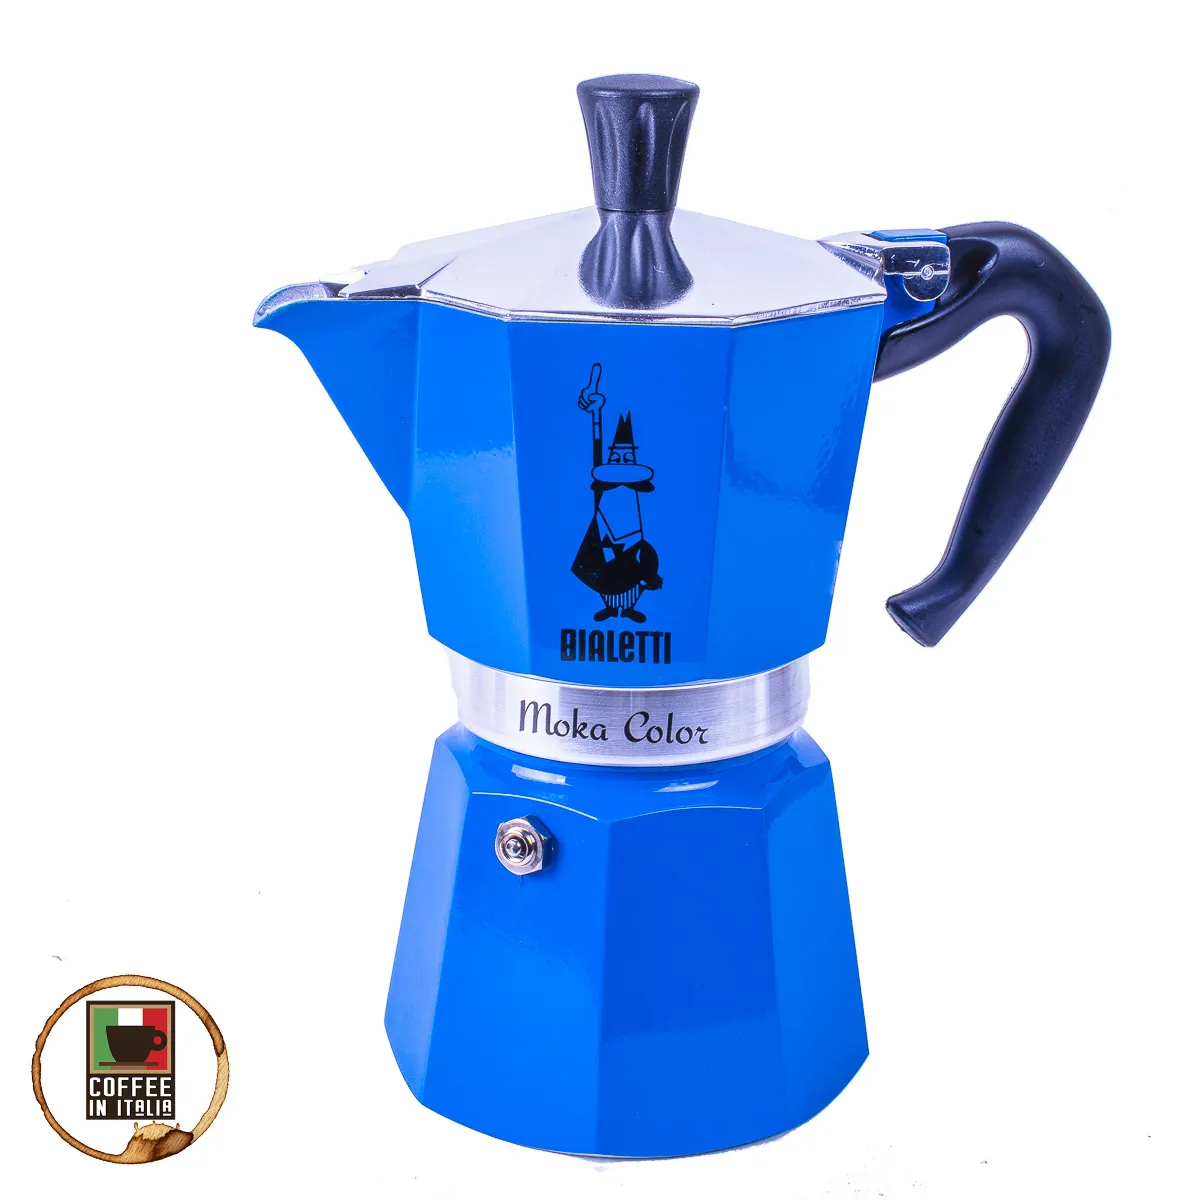 What Is Special About Bialetti - Moka Color